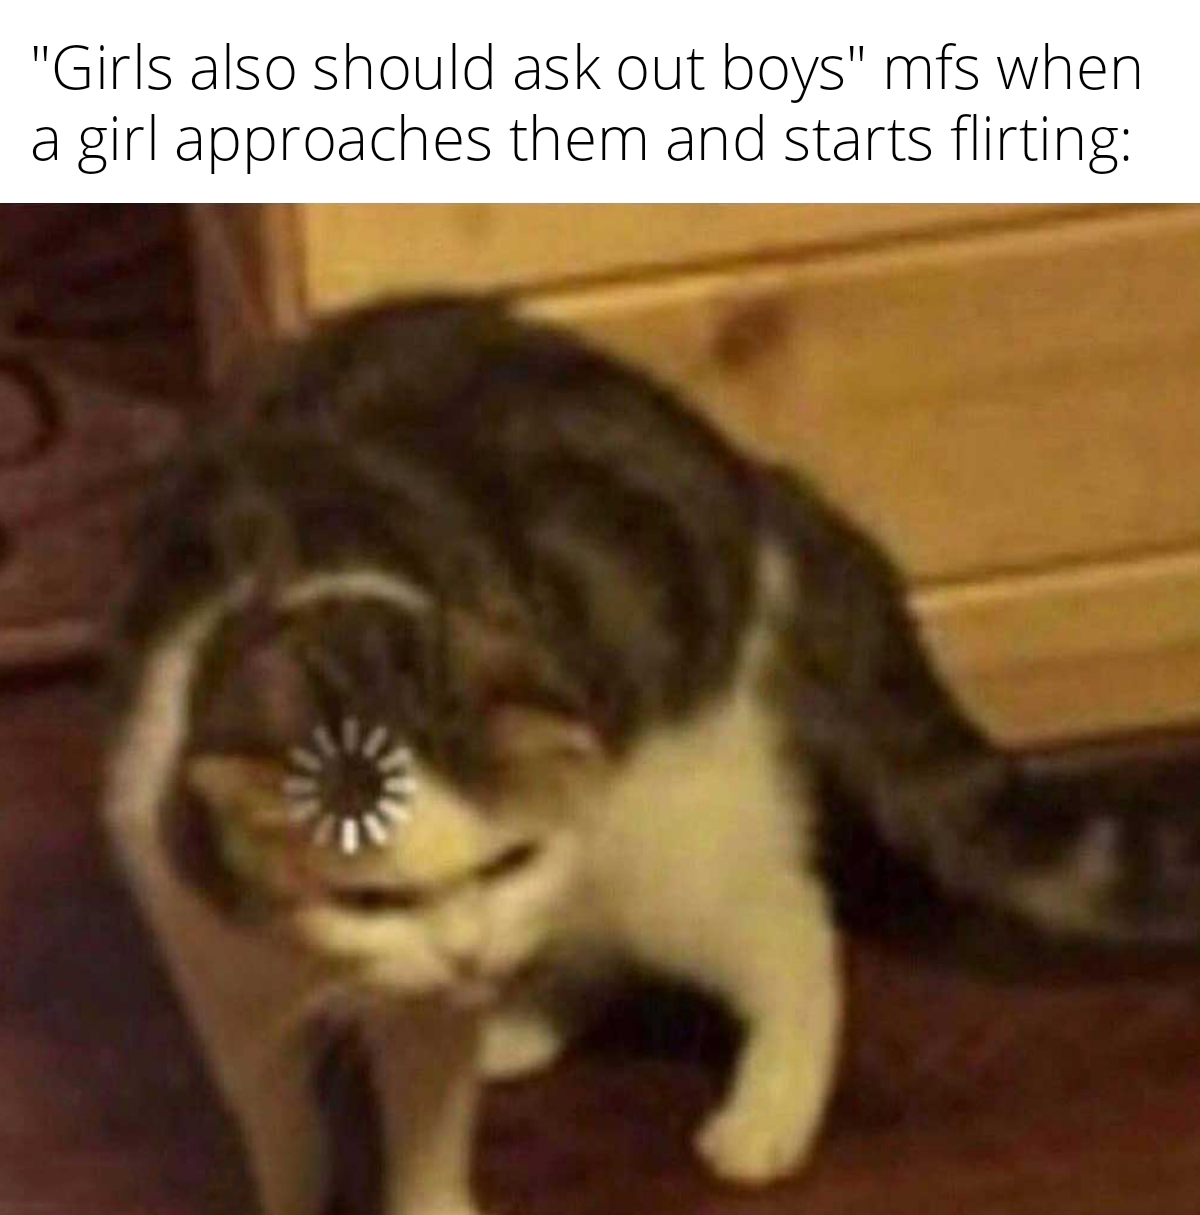 funny memes - dank memes - template cat loading meme - "Girls also should ask out boys" mfs when girl approaches them and starts flirting